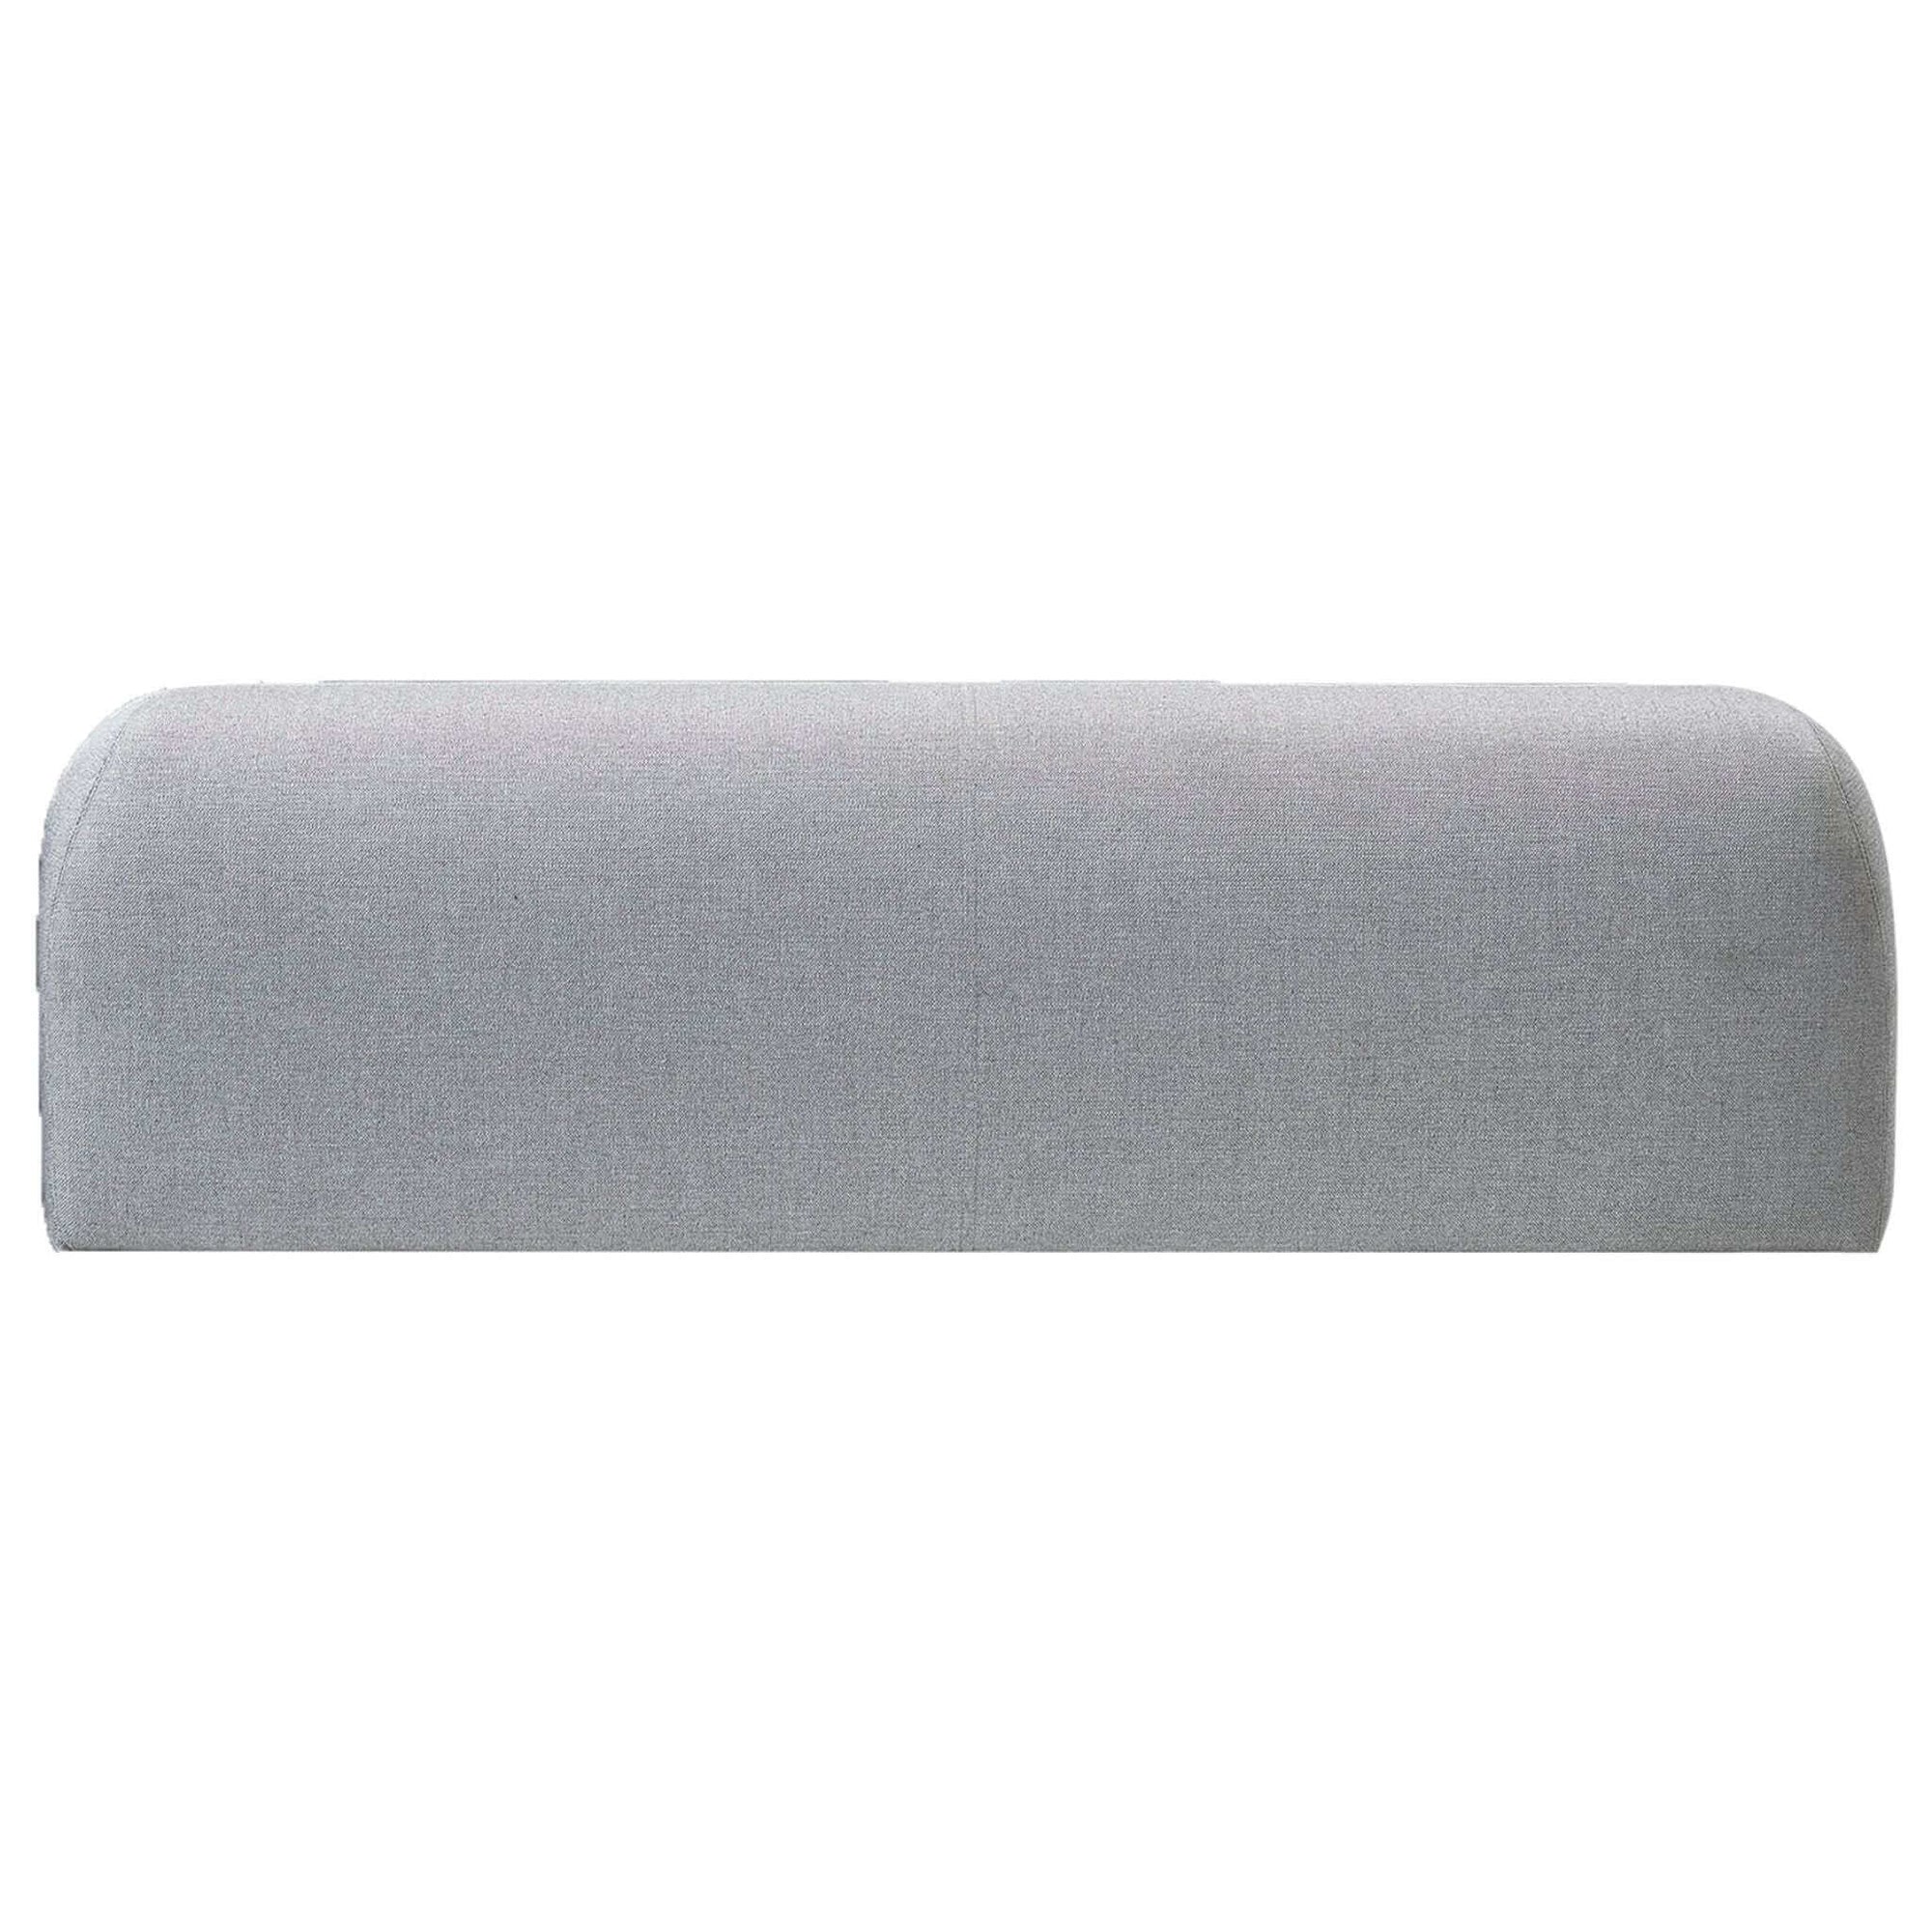 Cane-Line Space 2-Seater Sofa Back Cushion-Grey, Cane-line AirTouch